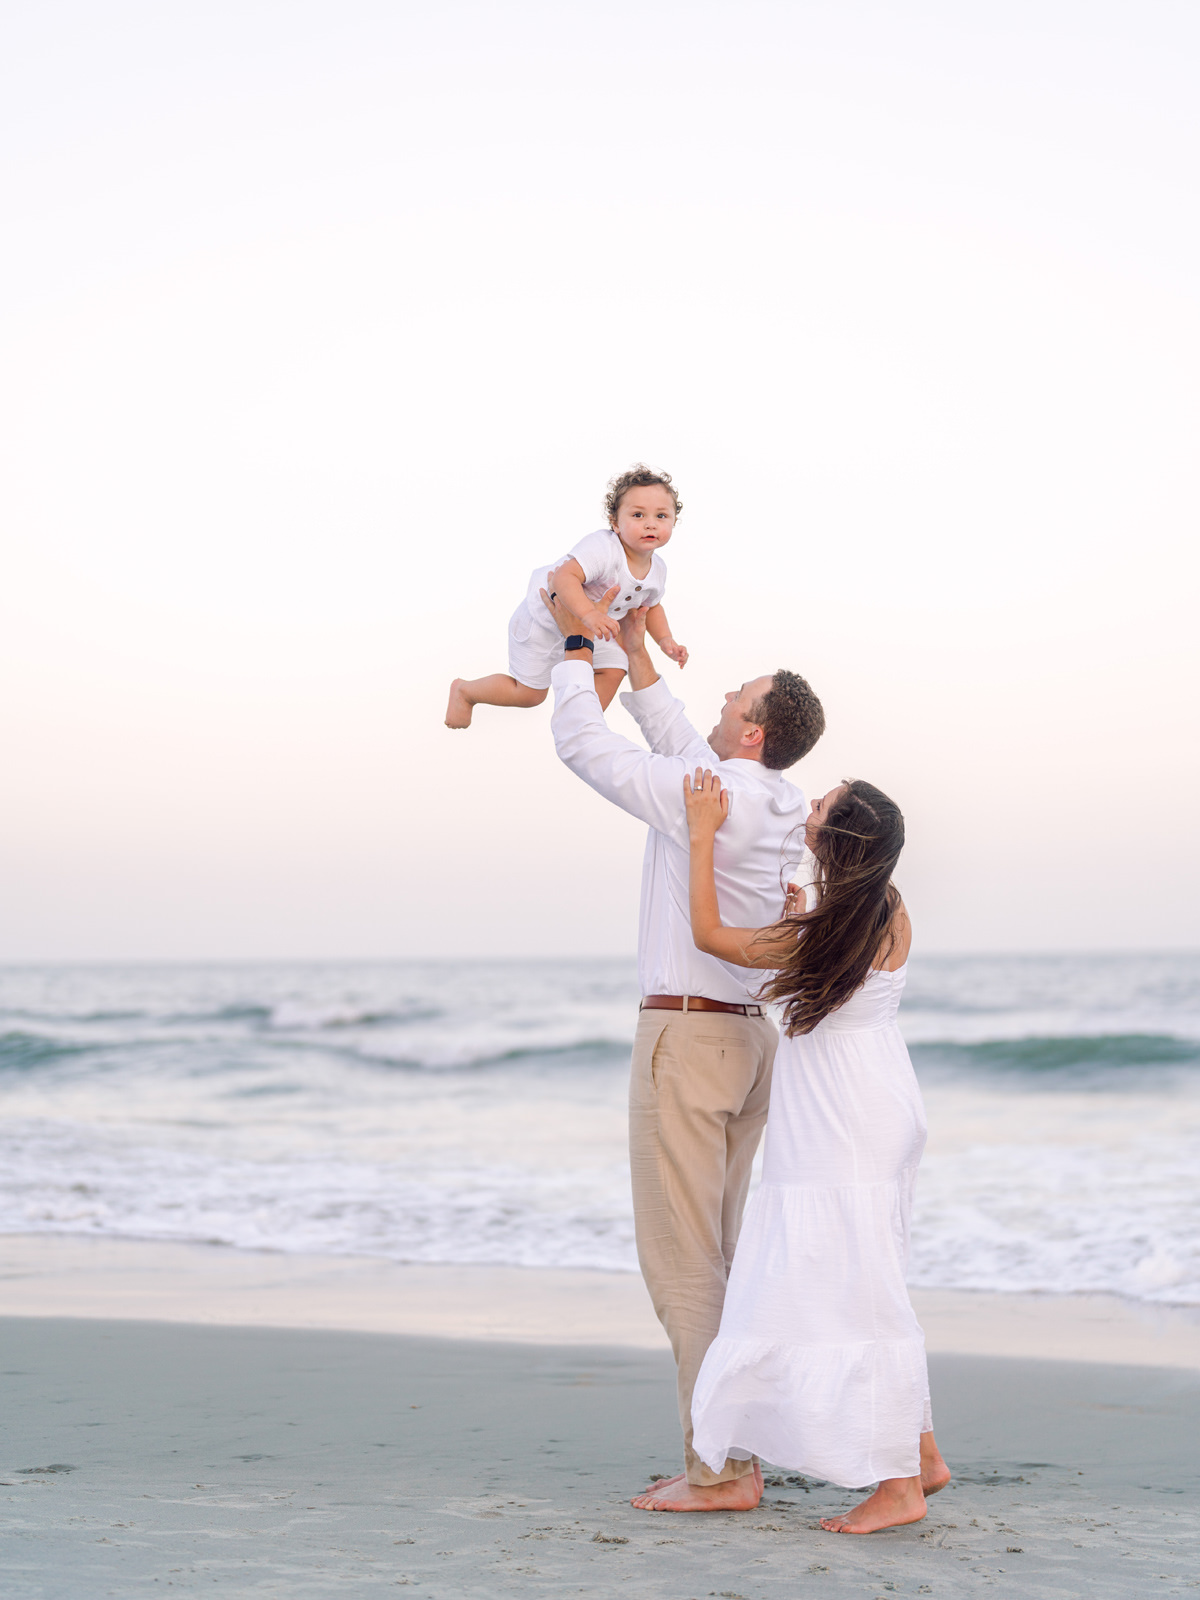 Family Pictures at the Beach by Myrtle Beach Photographer Natallia Belman